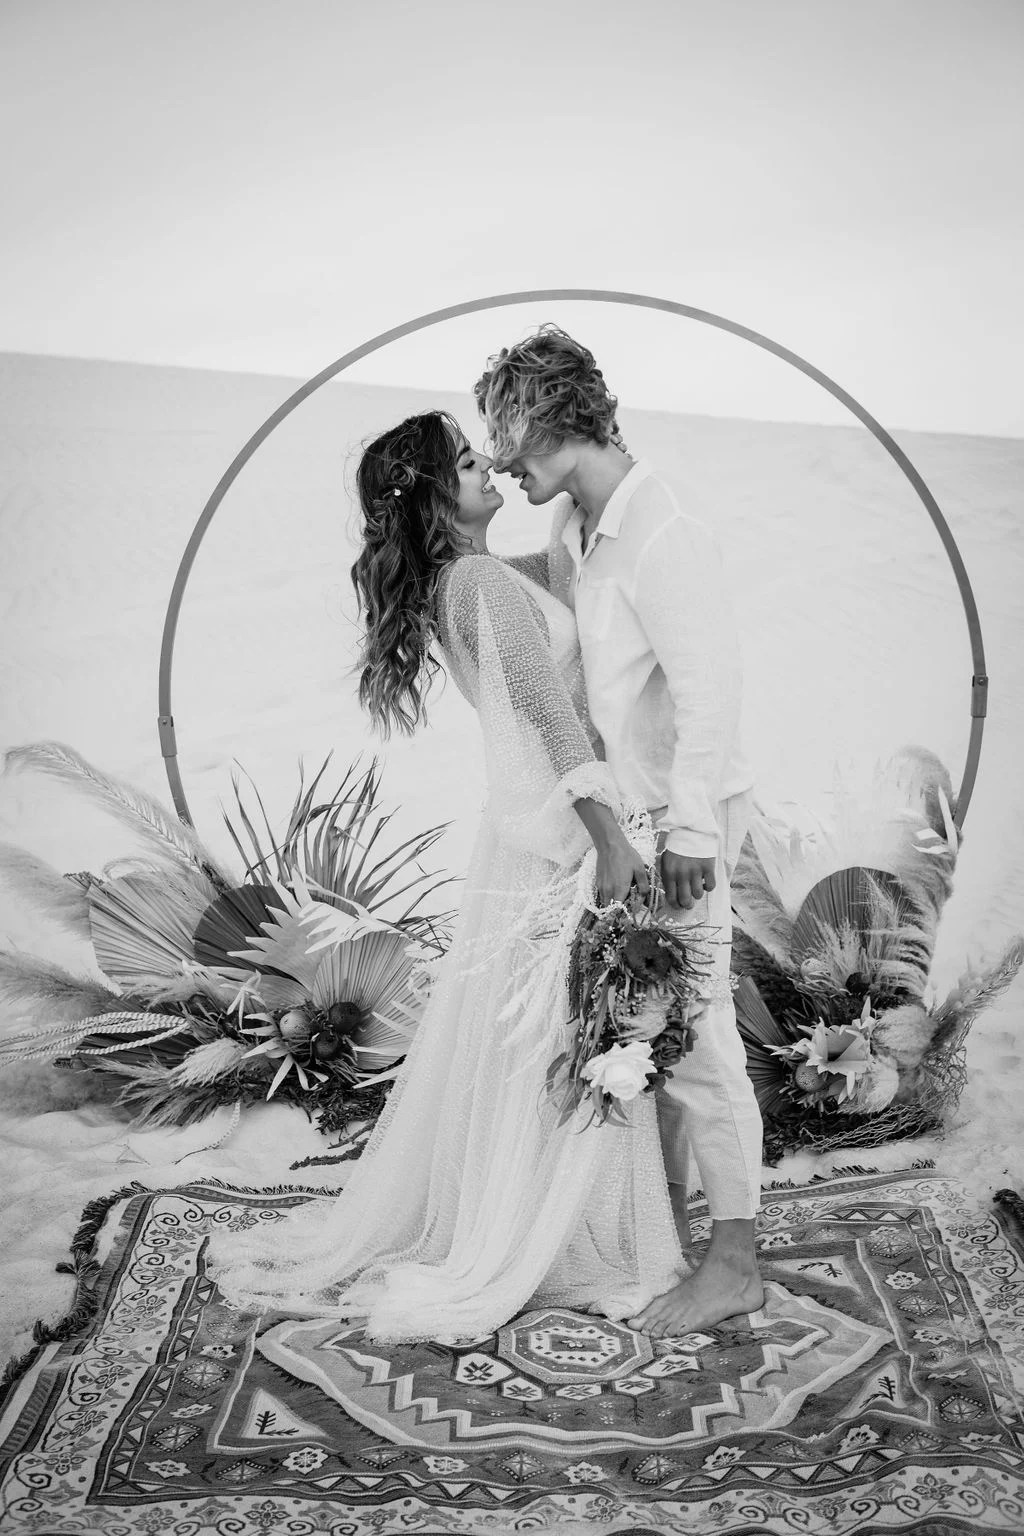 Jypsea photography perth weddings sand dunes elopement bridal gowns hair makeup florals styled boho